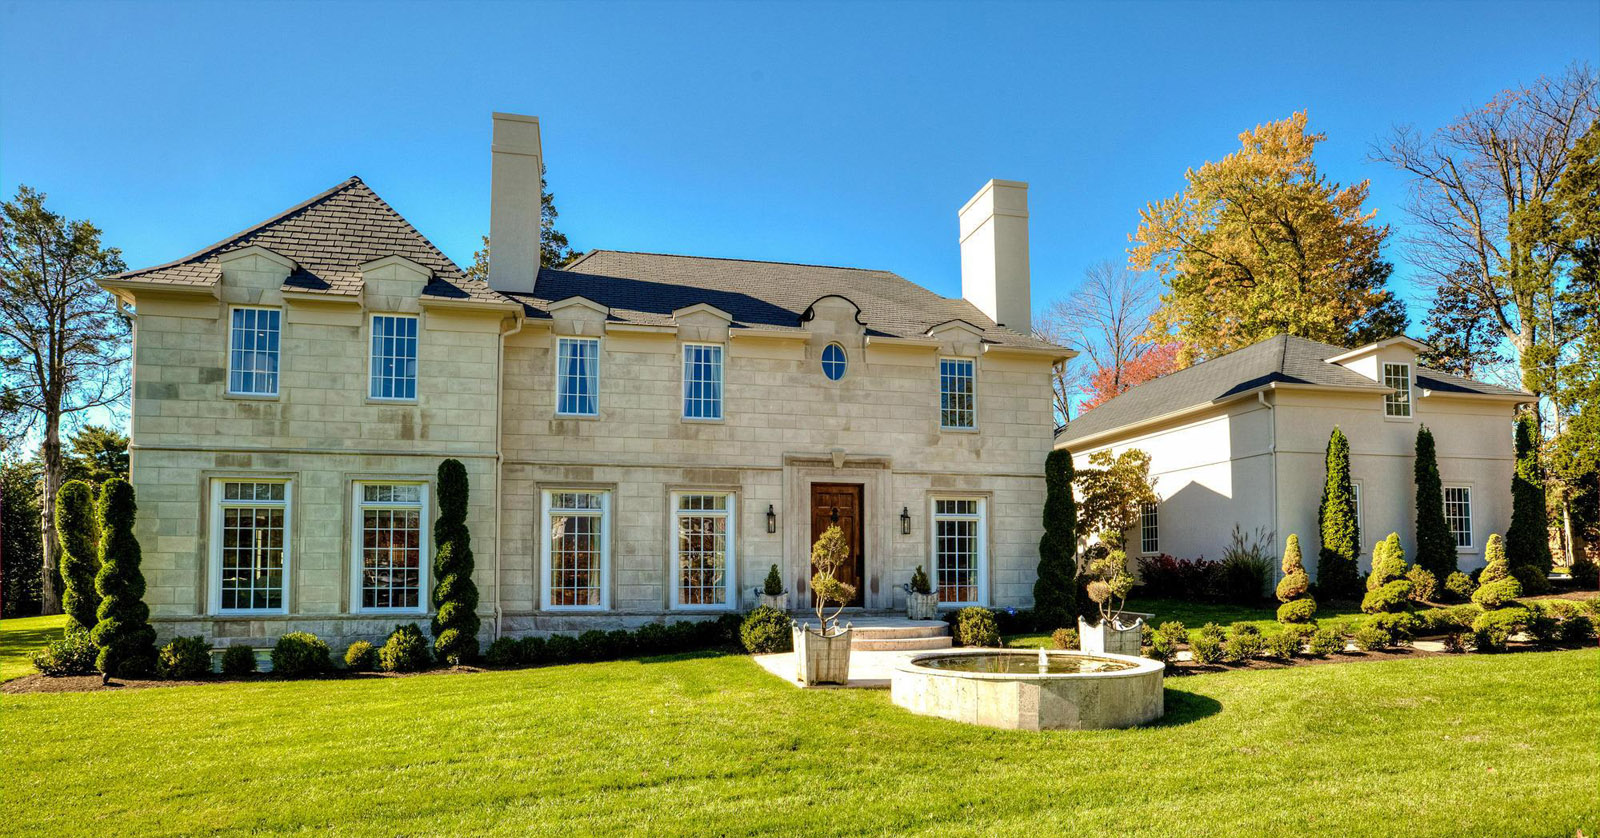 This photo provided by MRIS listing service shows 610 Braddock Road in Alexandria, Virginia. The French country-style house was built in 2012 and features seven bedrooms and nine bathrooms. The home sold for $3.765 million in July. (MRIS)